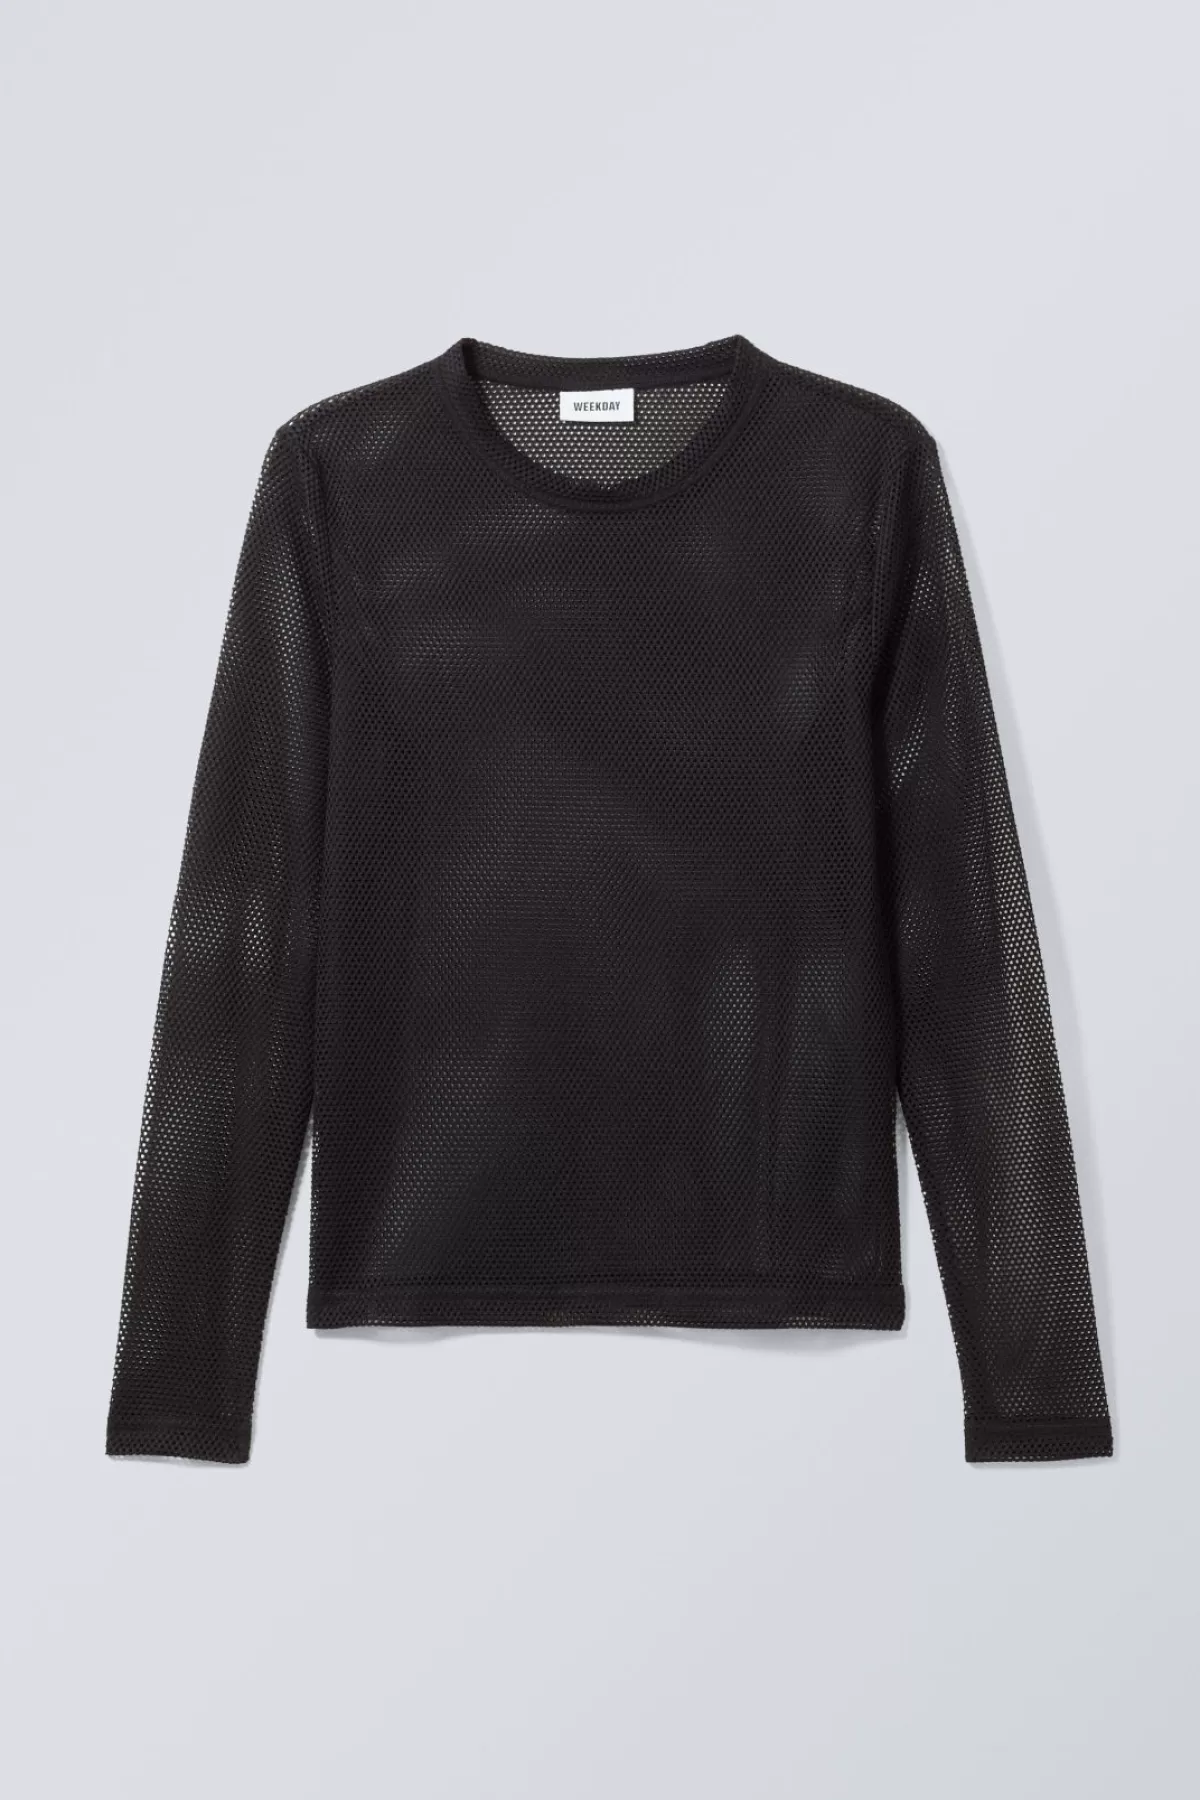 Weekday Sporty Mesh Long Sleeved T- shirt Best